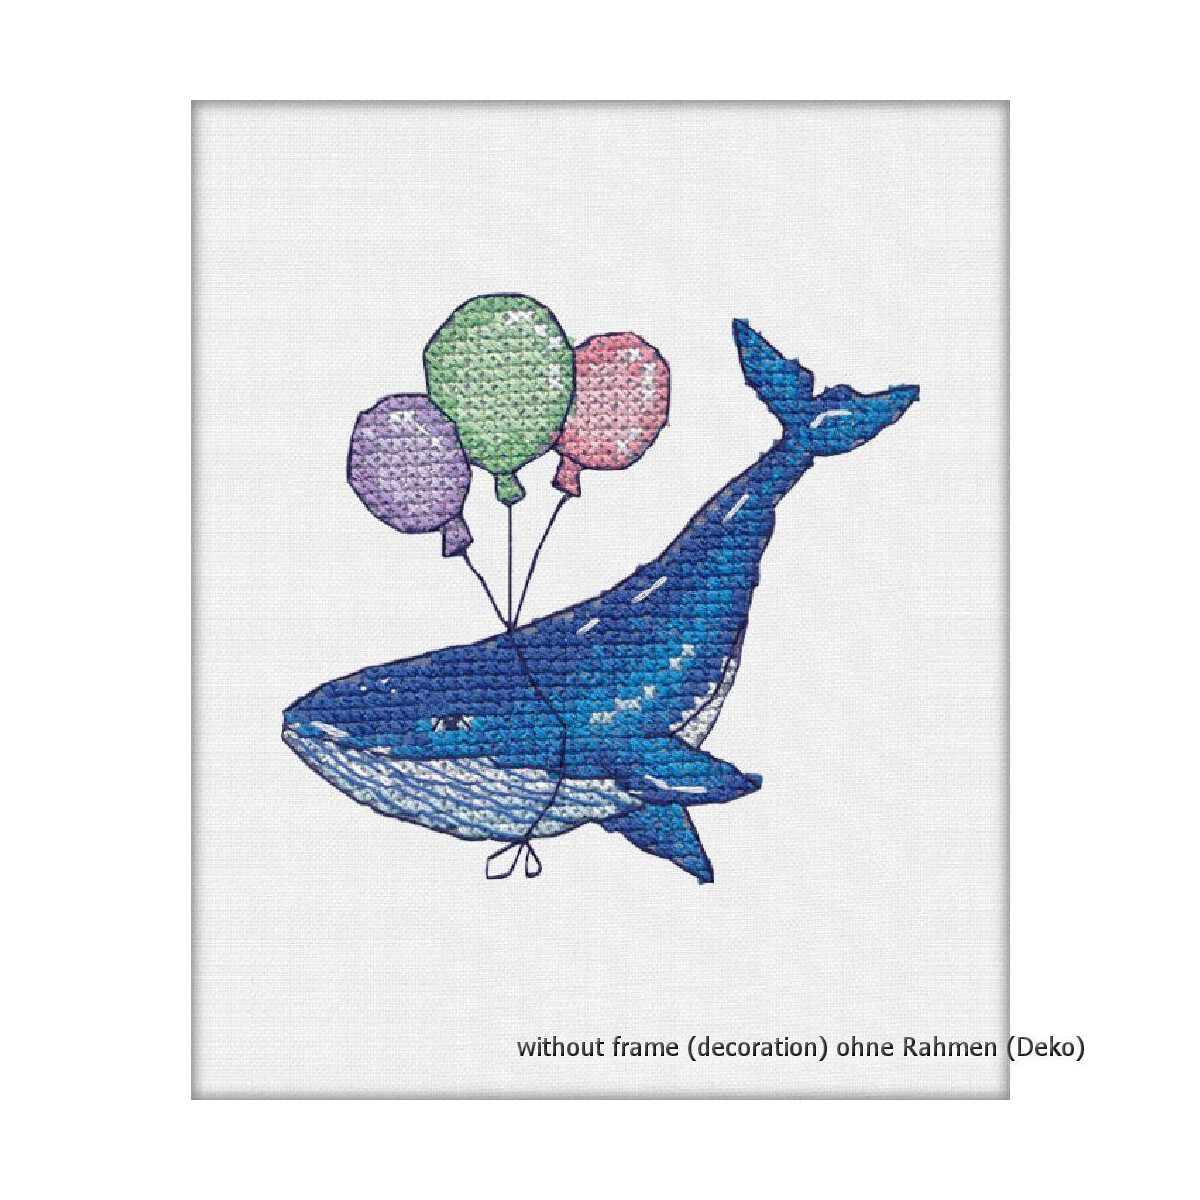 Oven counted cross stitch kit "Whale", 8x9cm, DIY